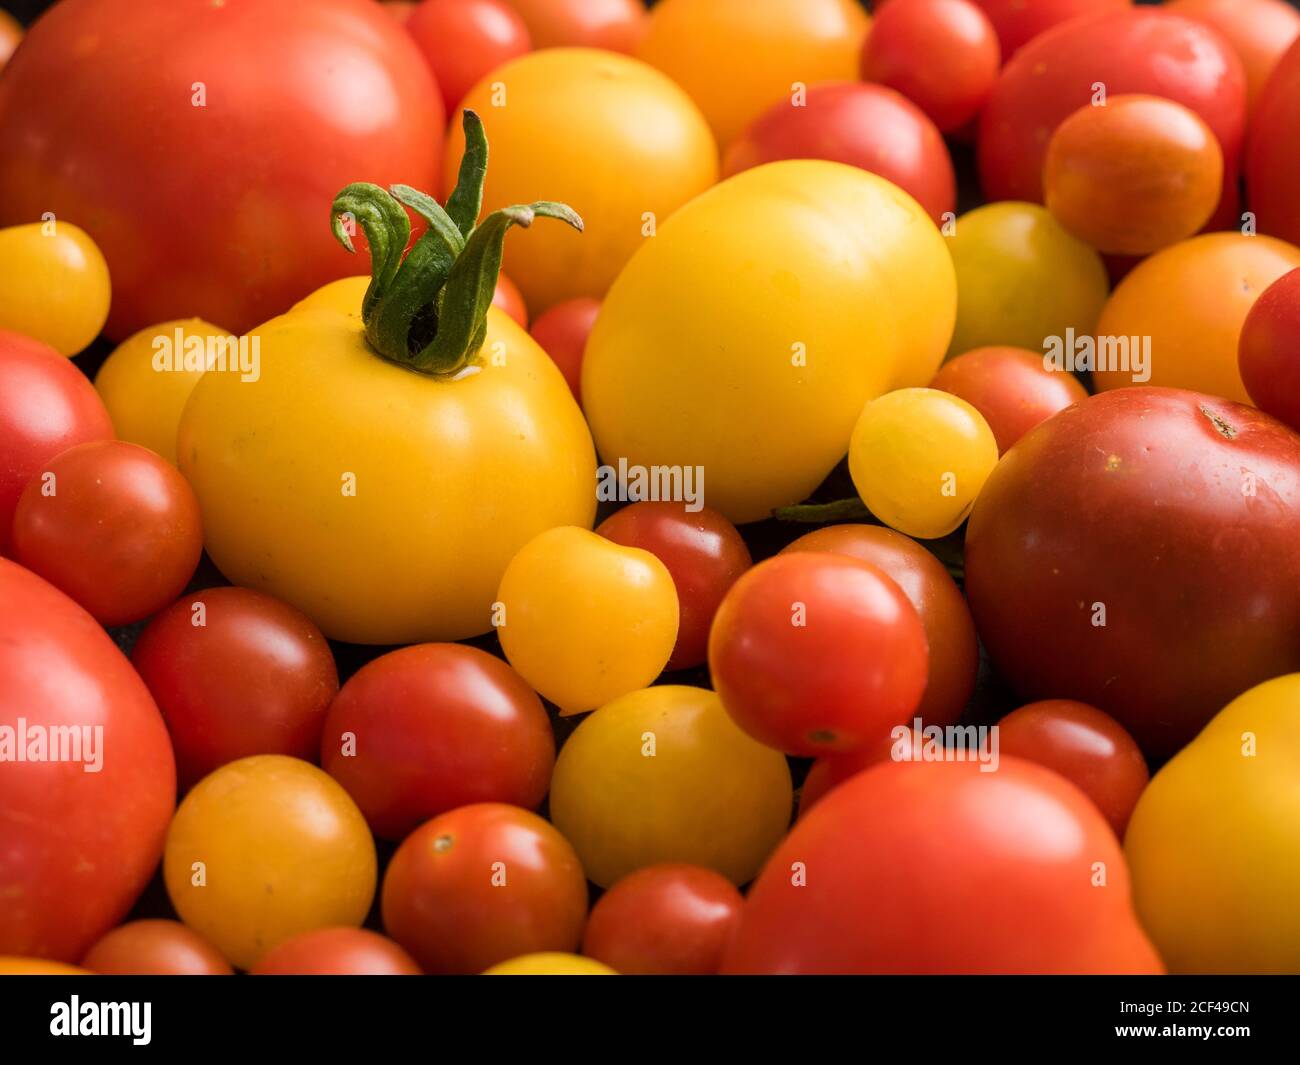 Collection of red, orange and yellow tomato cultivars. Stock Photo